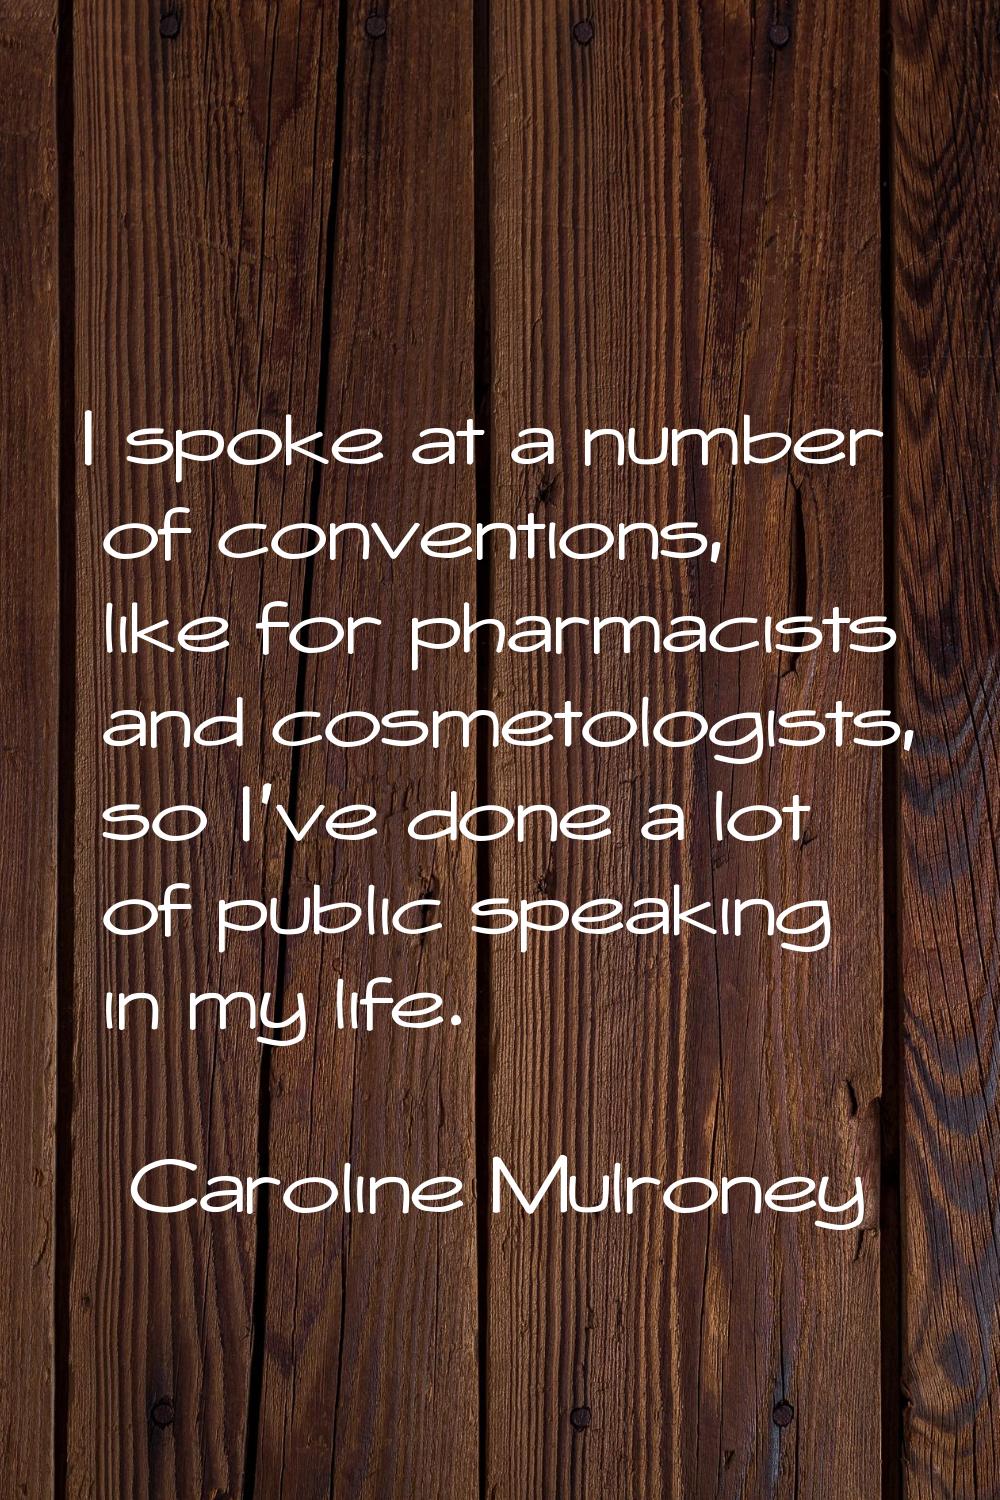 I spoke at a number of conventions, like for pharmacists and cosmetologists, so I've done a lot of 